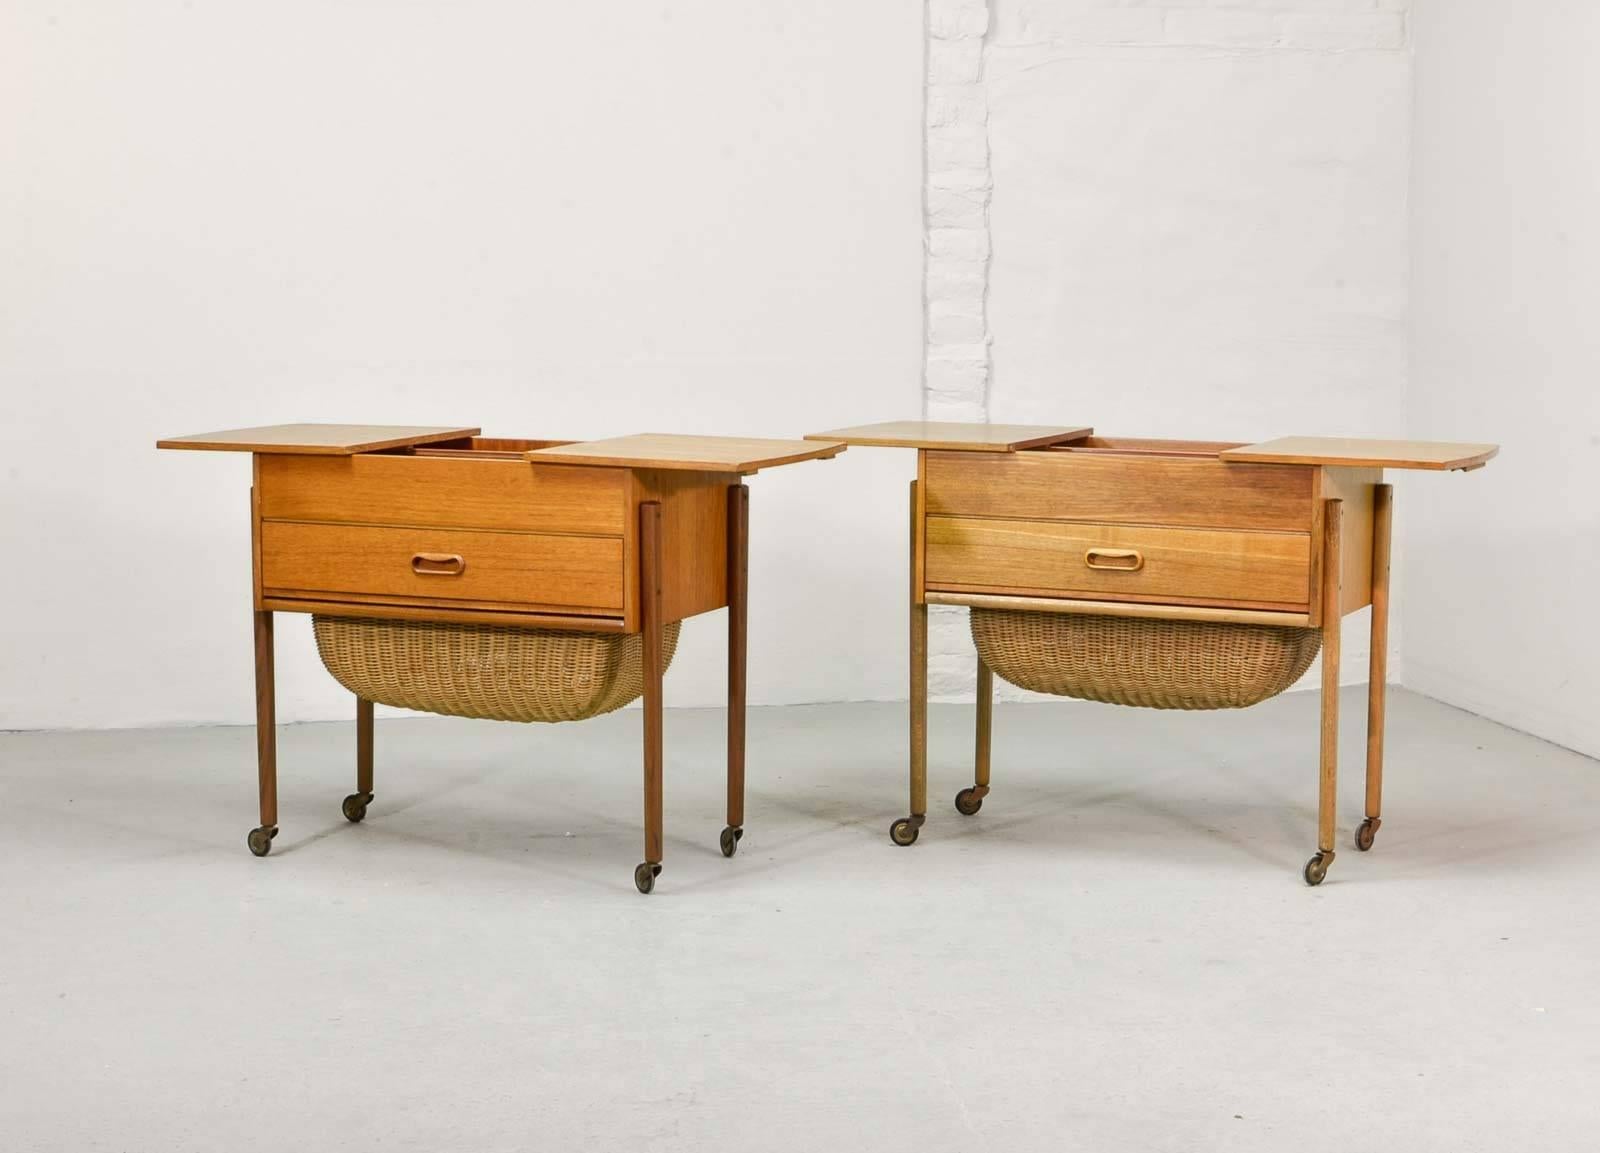 This great pair of solid teak Scandinavian sewing tables were designed in the 1960s and feature a handwoven cane basket with inside drawer for sewing implements. Although these very lovely pieces were designed to house sewing tools, they perfectly